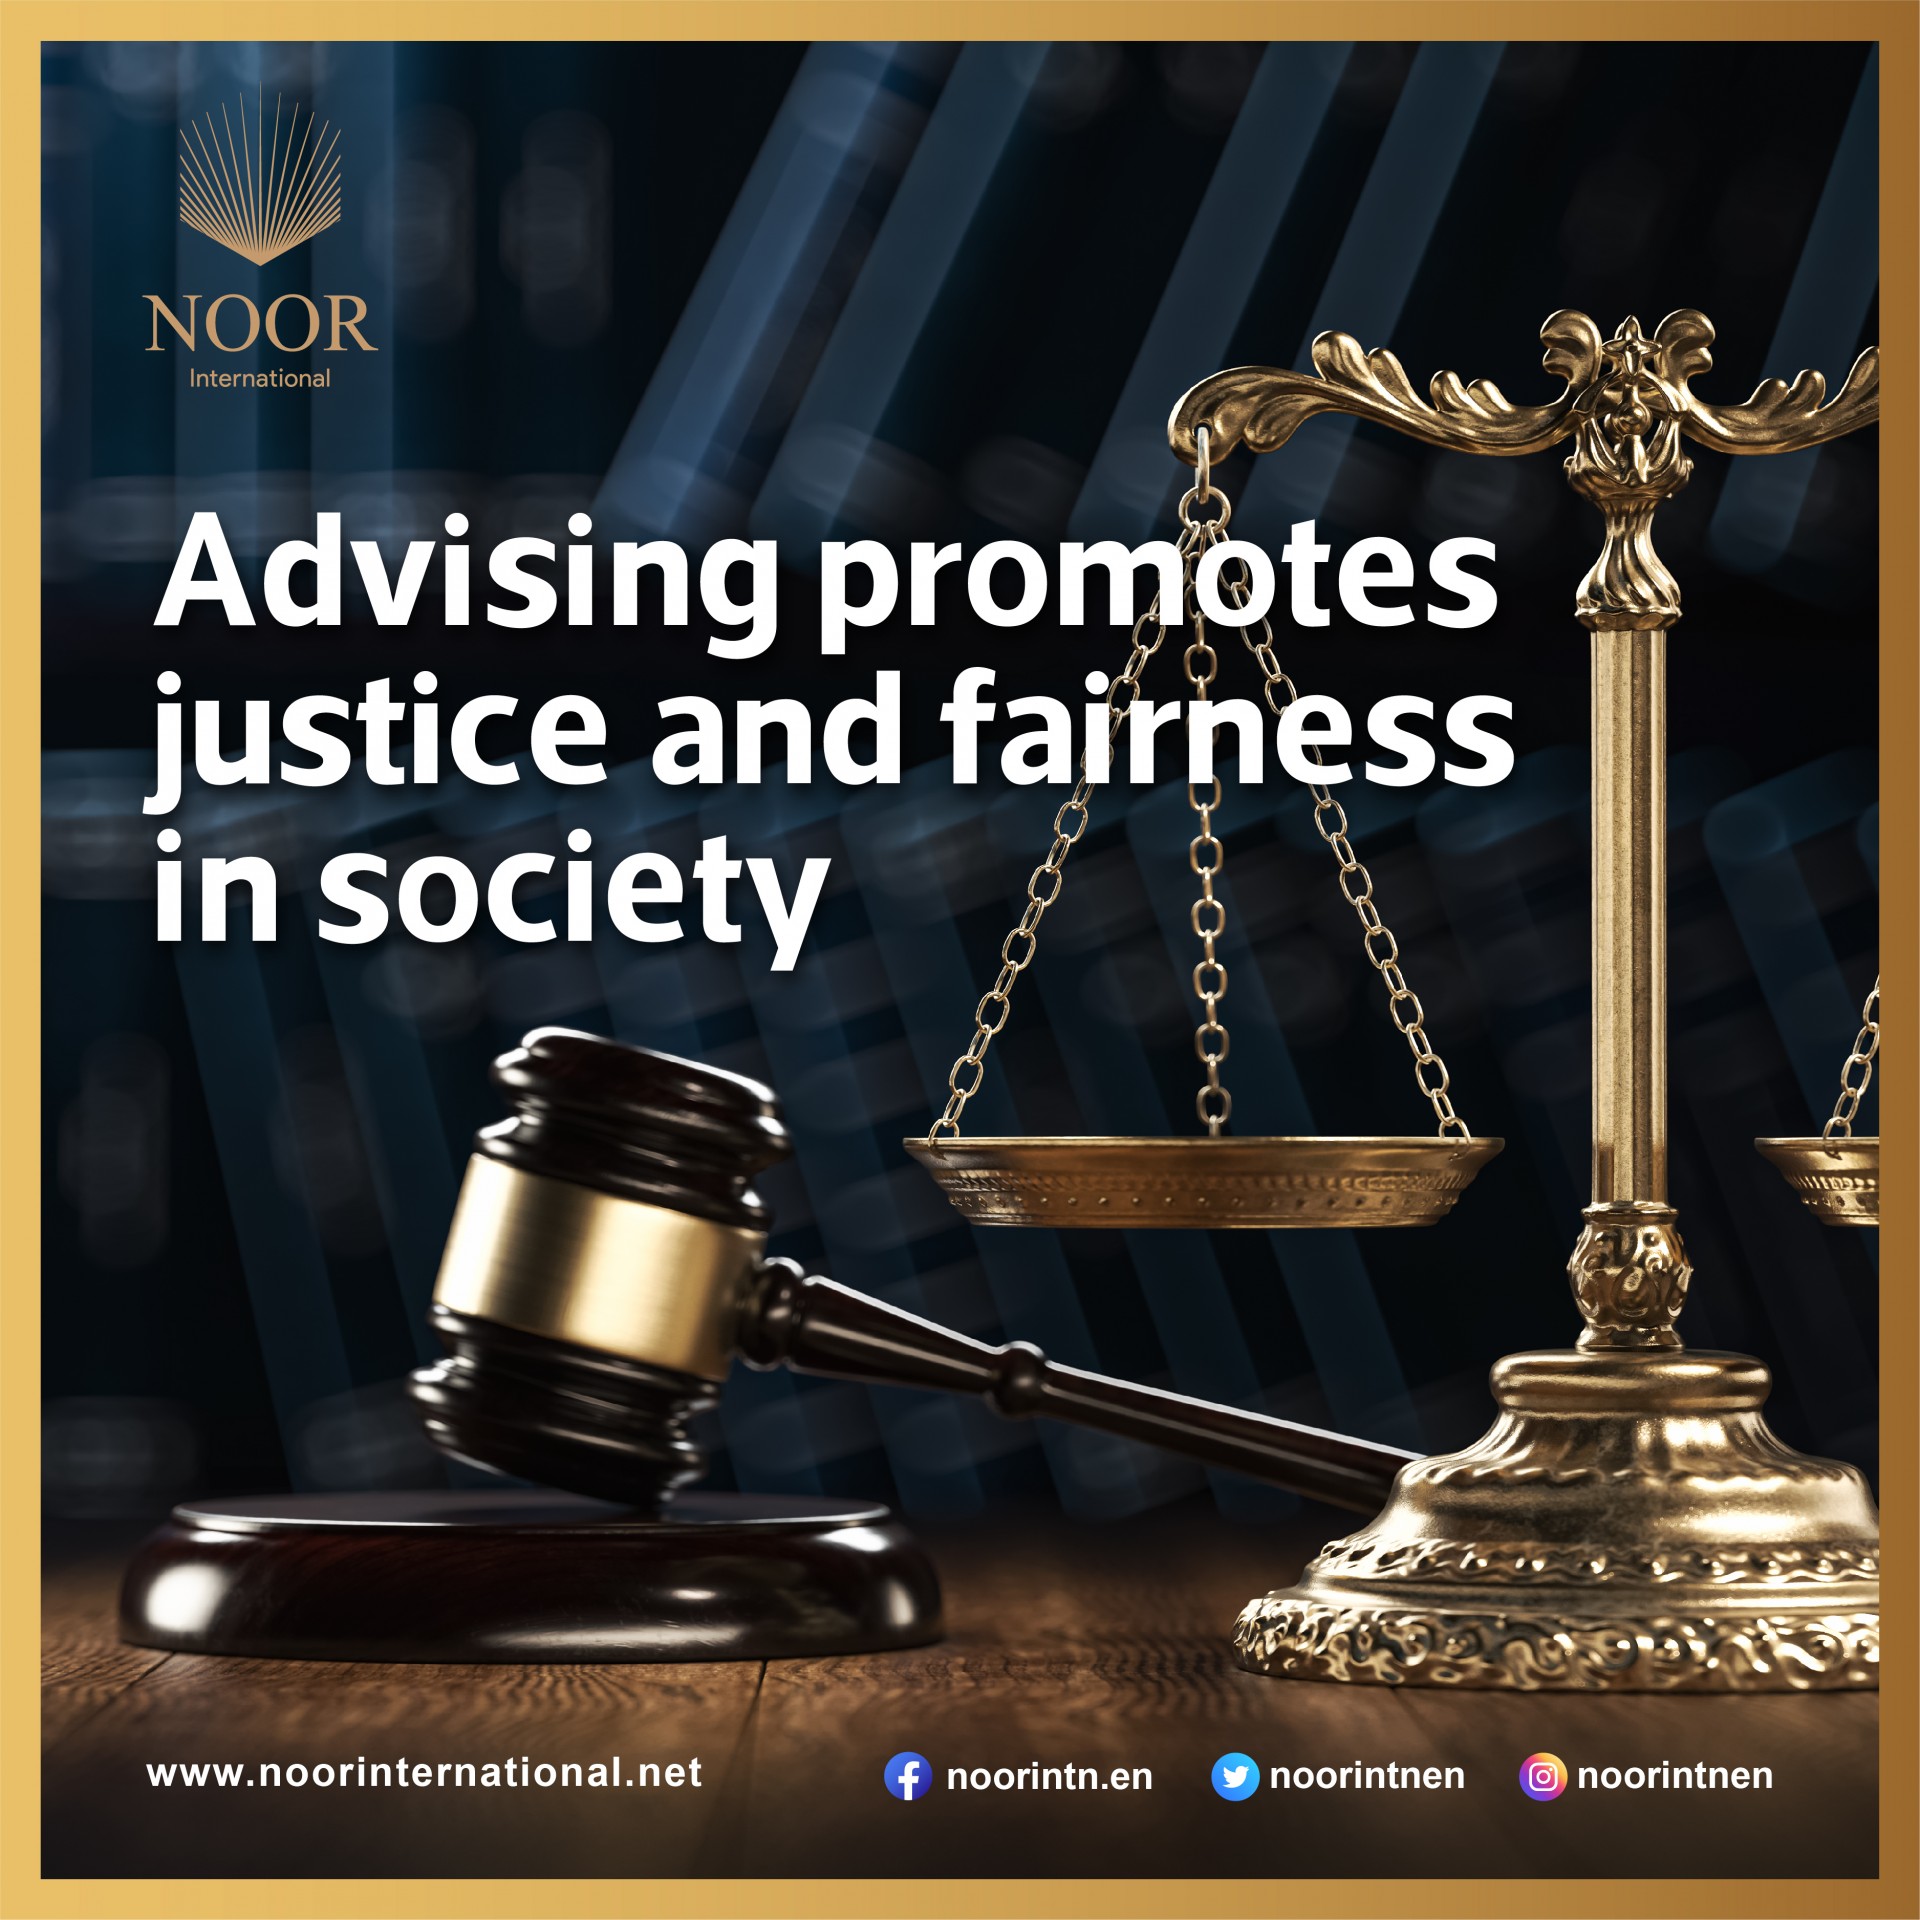 Advising promotes justice and fairness in society